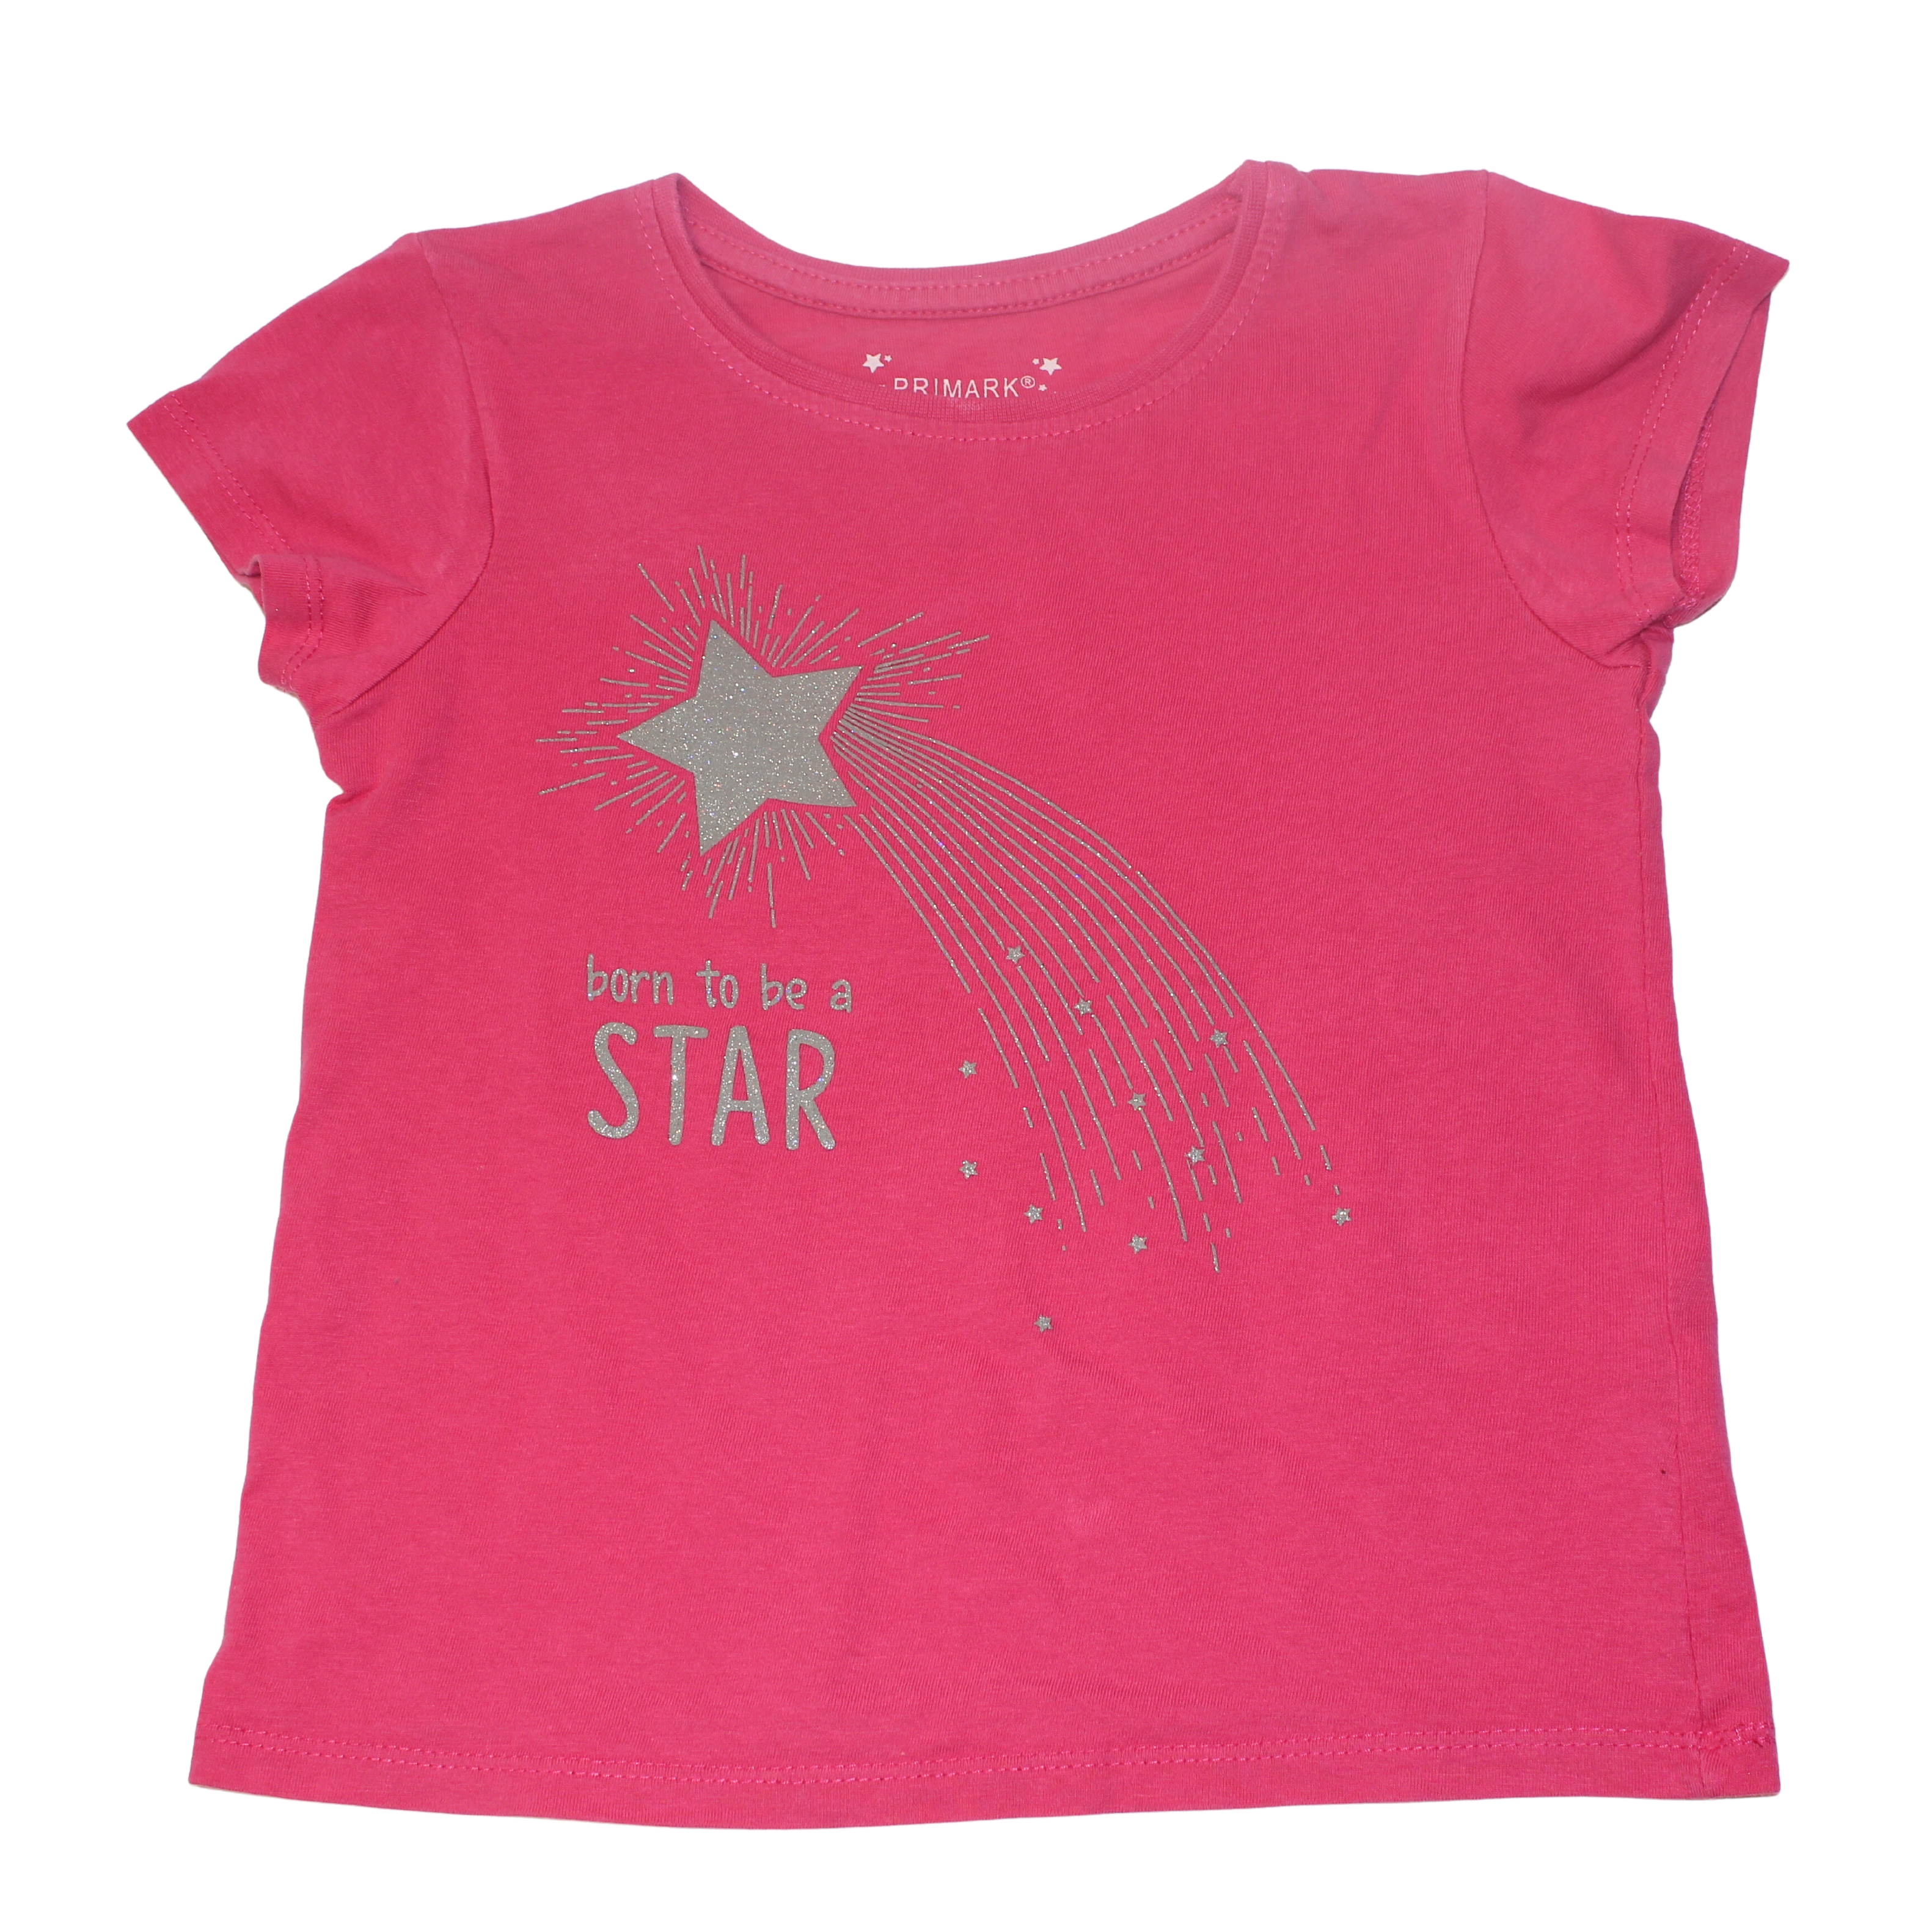 Born to be a Star Tee